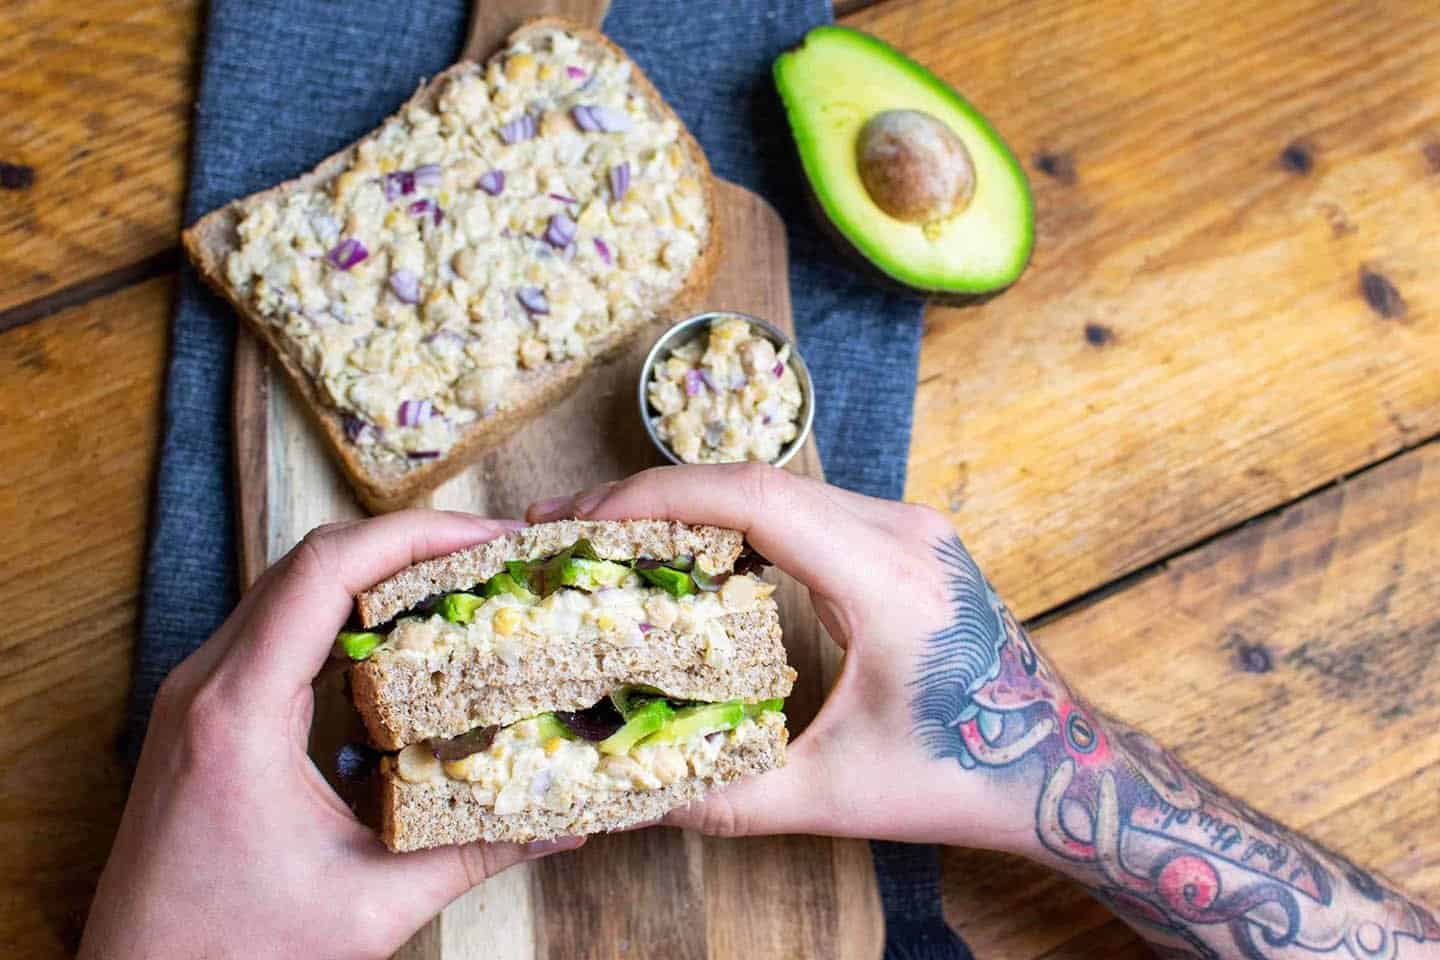 Vegan tuna sandwich being held up by a pair of hands on a chopping board.